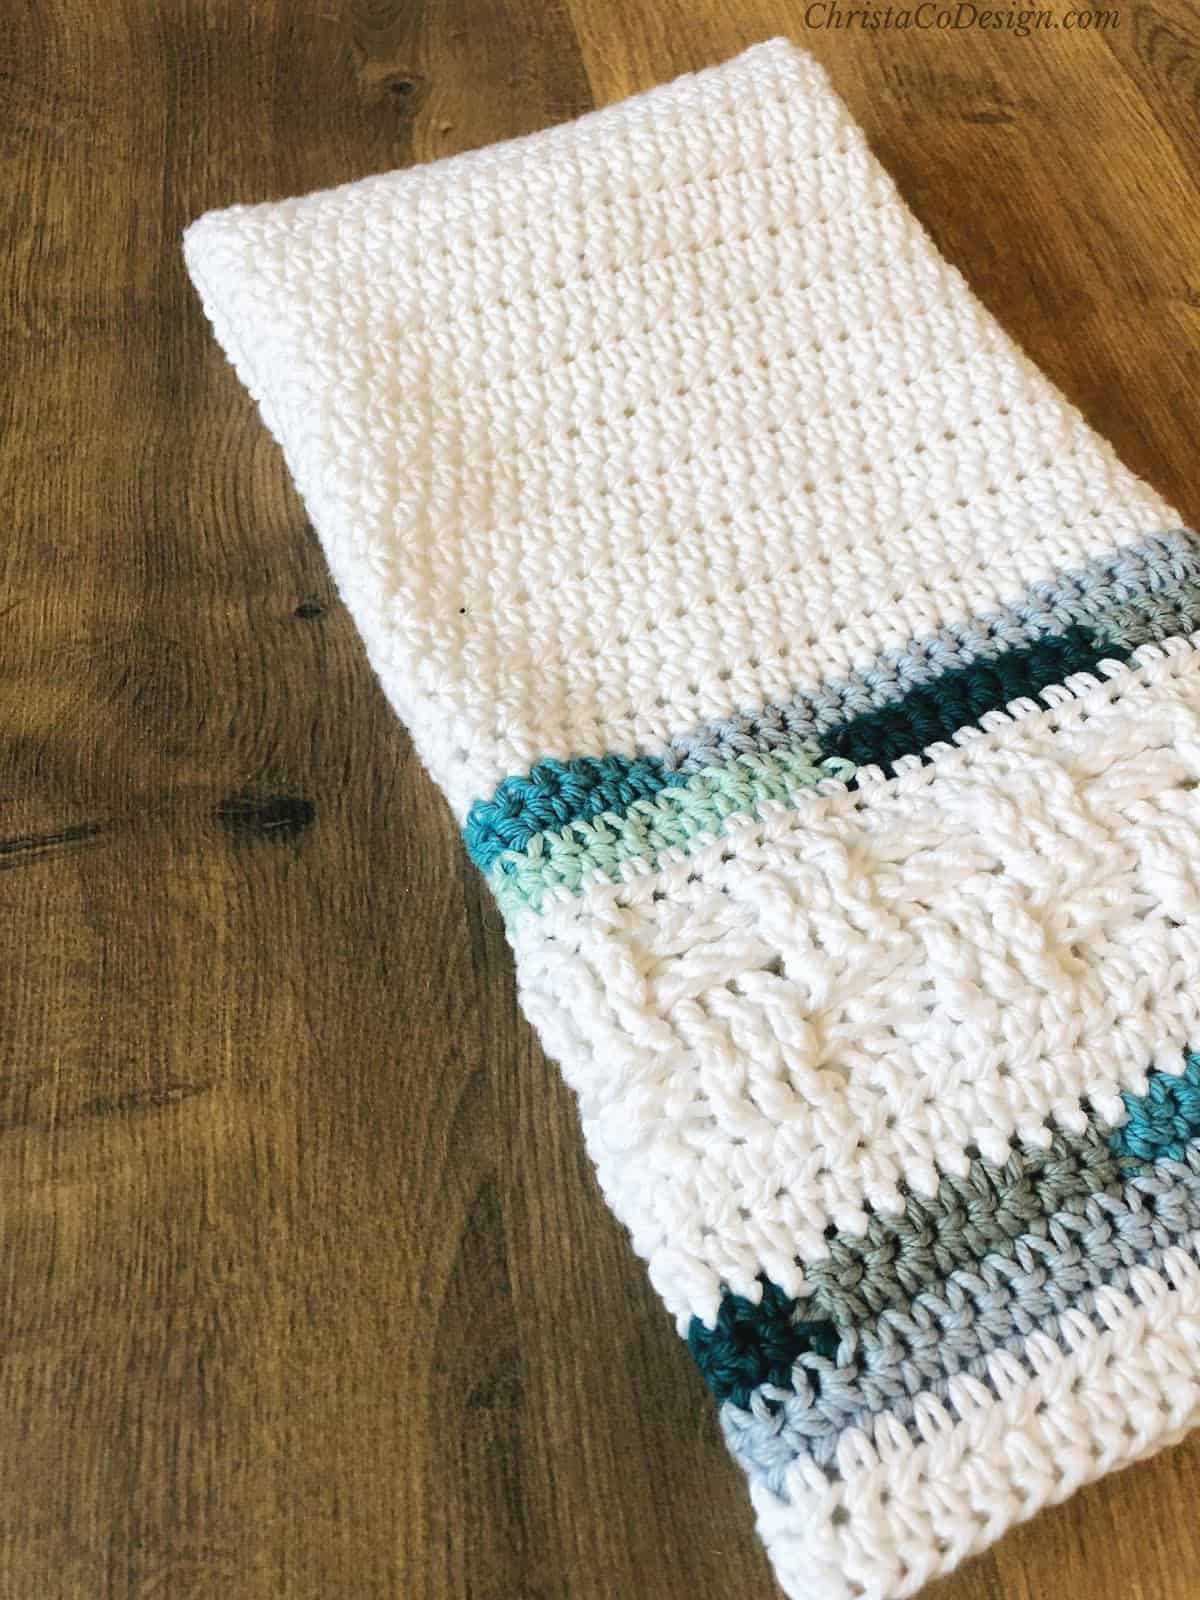 White crochet towel with blue stripes on wood table.